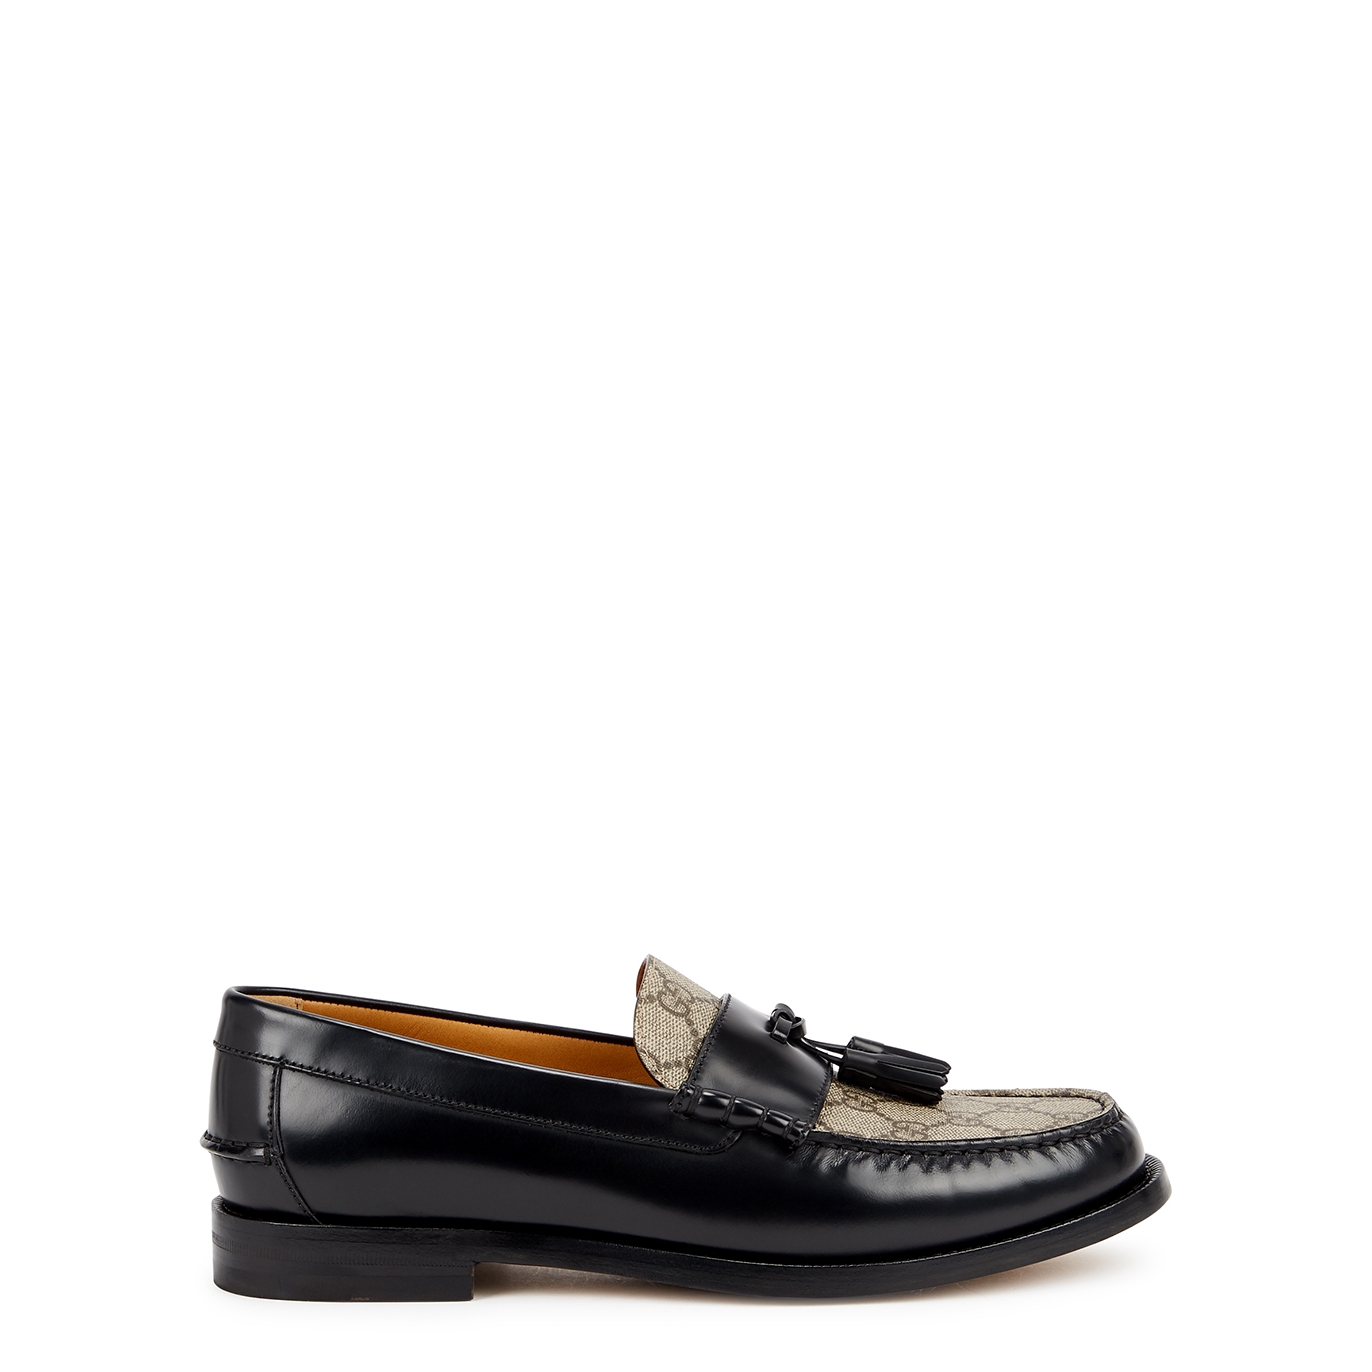 Gucci Kaveh GG Supreme Black Leather Loafers - 8